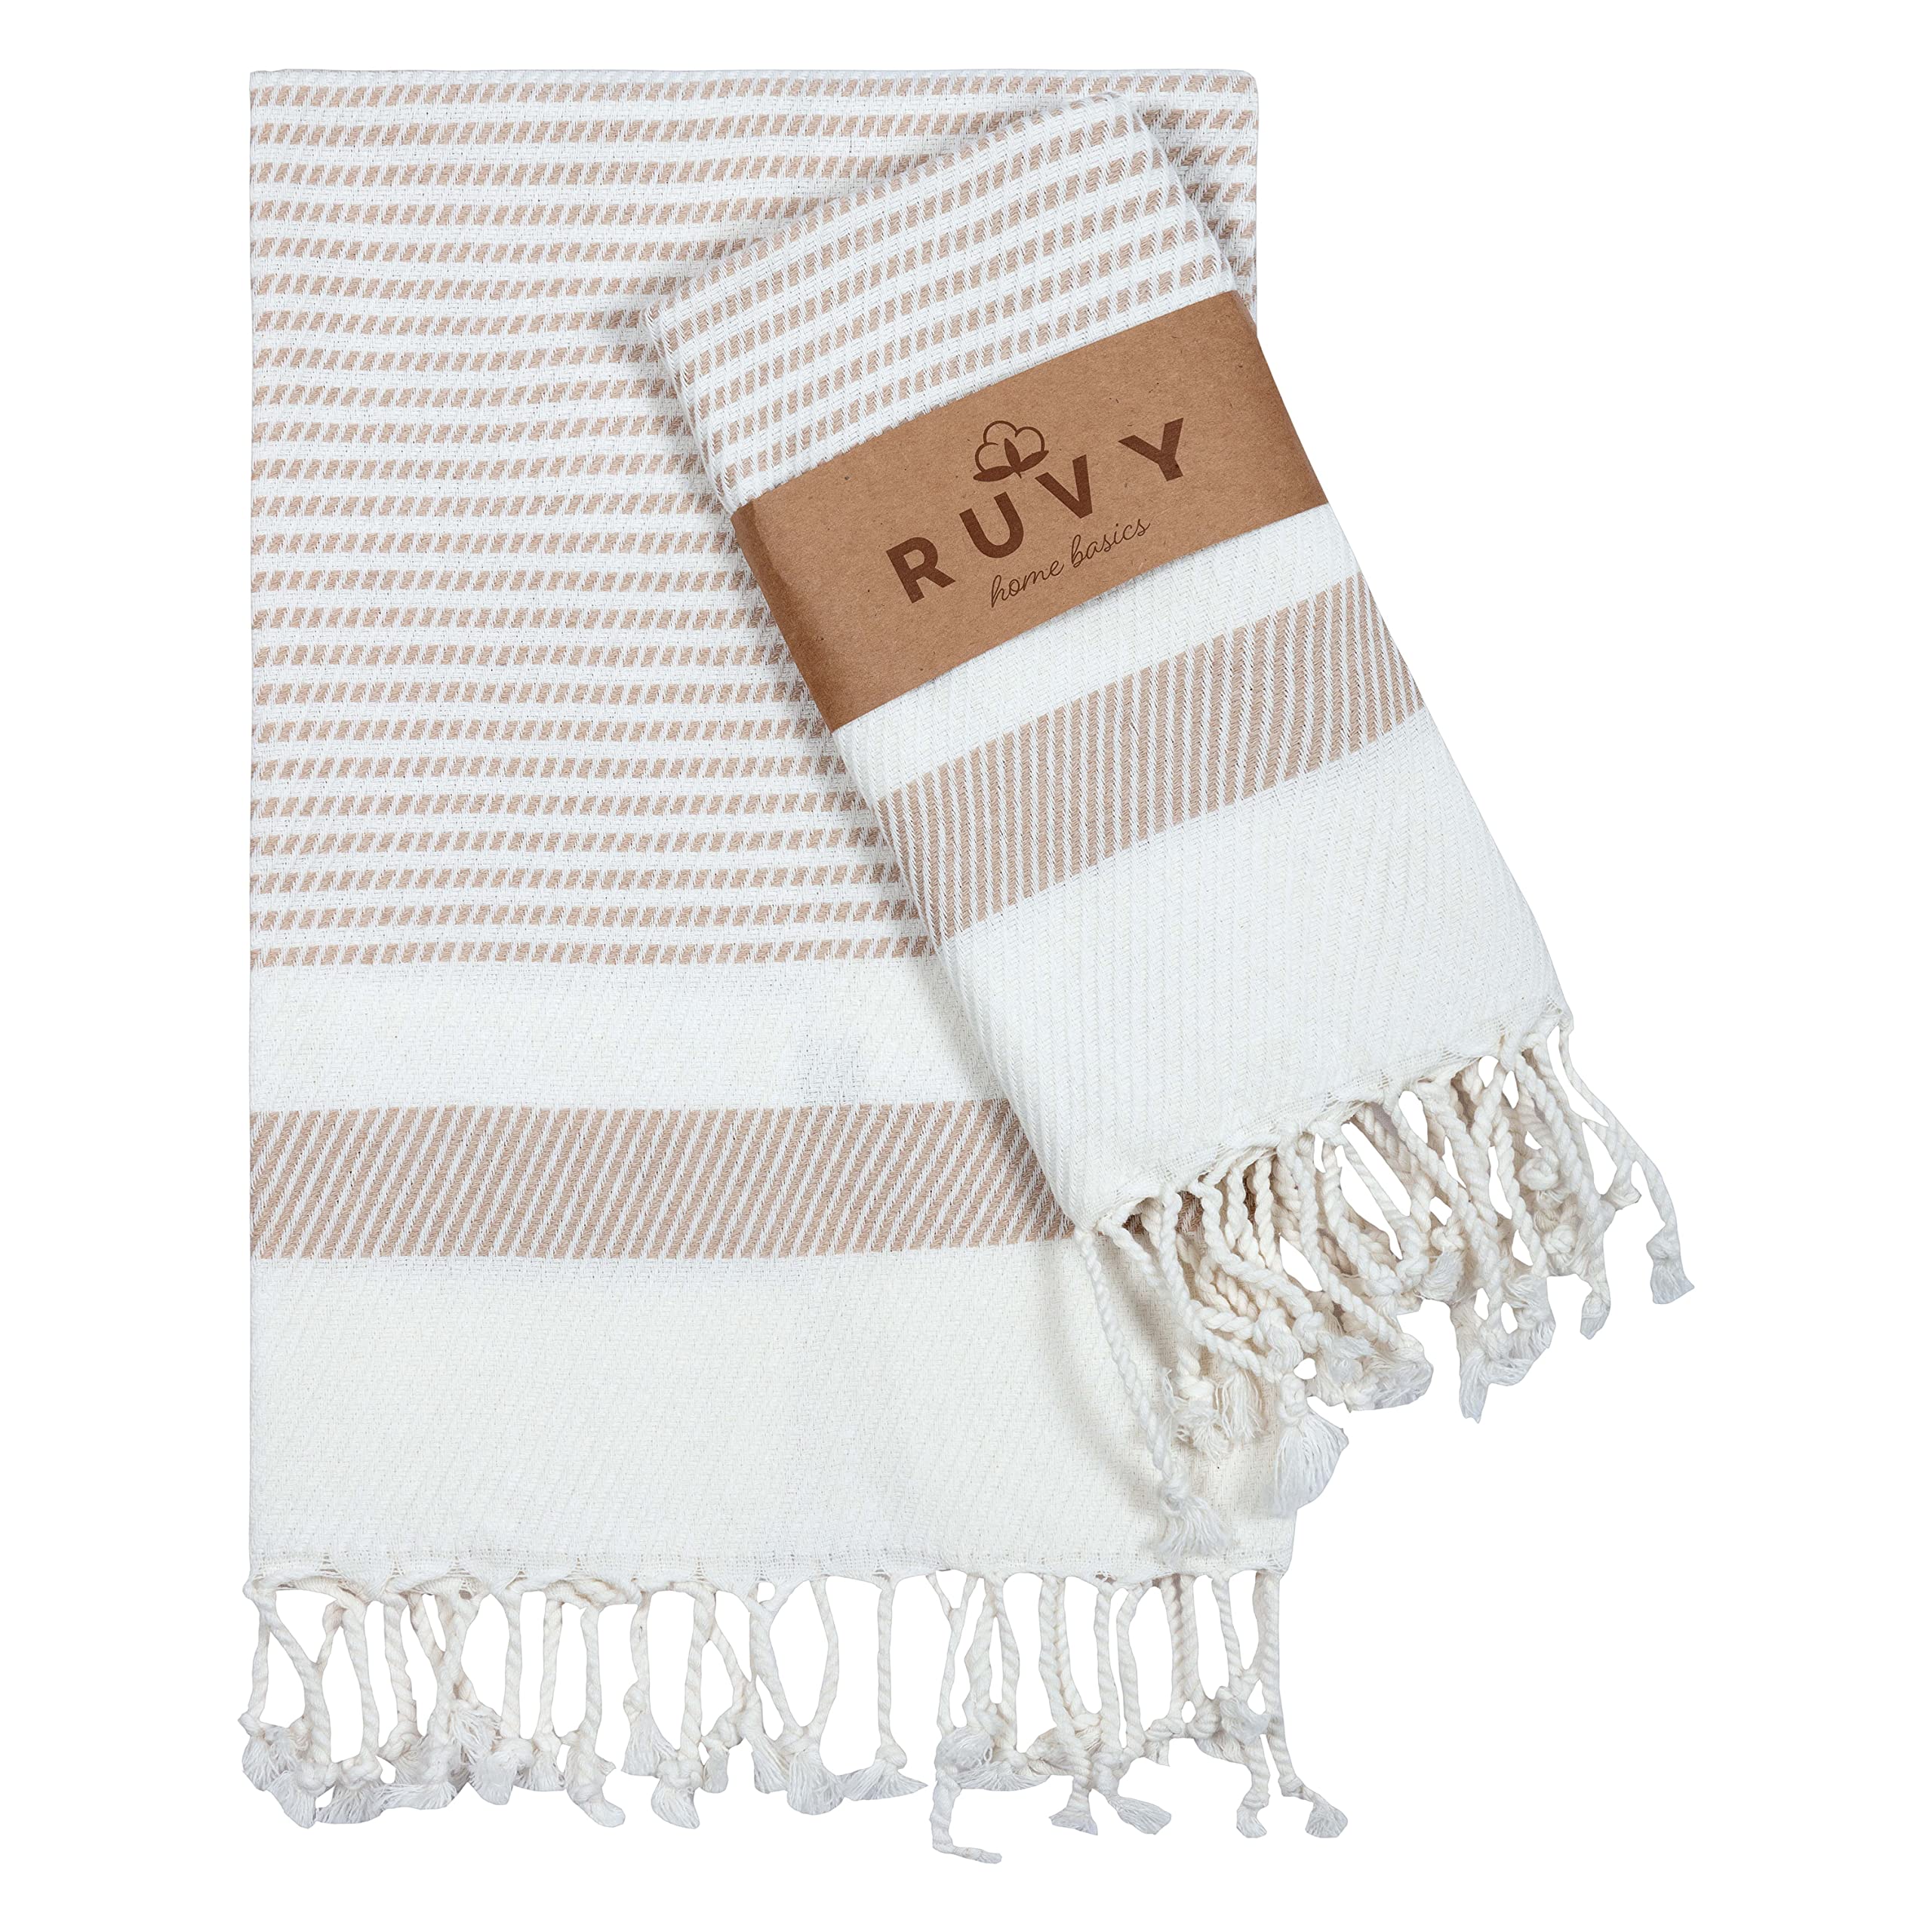 Ruvy Home Basics Turkish Hand Towels for Bathroom Set of 2, 18x40,  Cotton